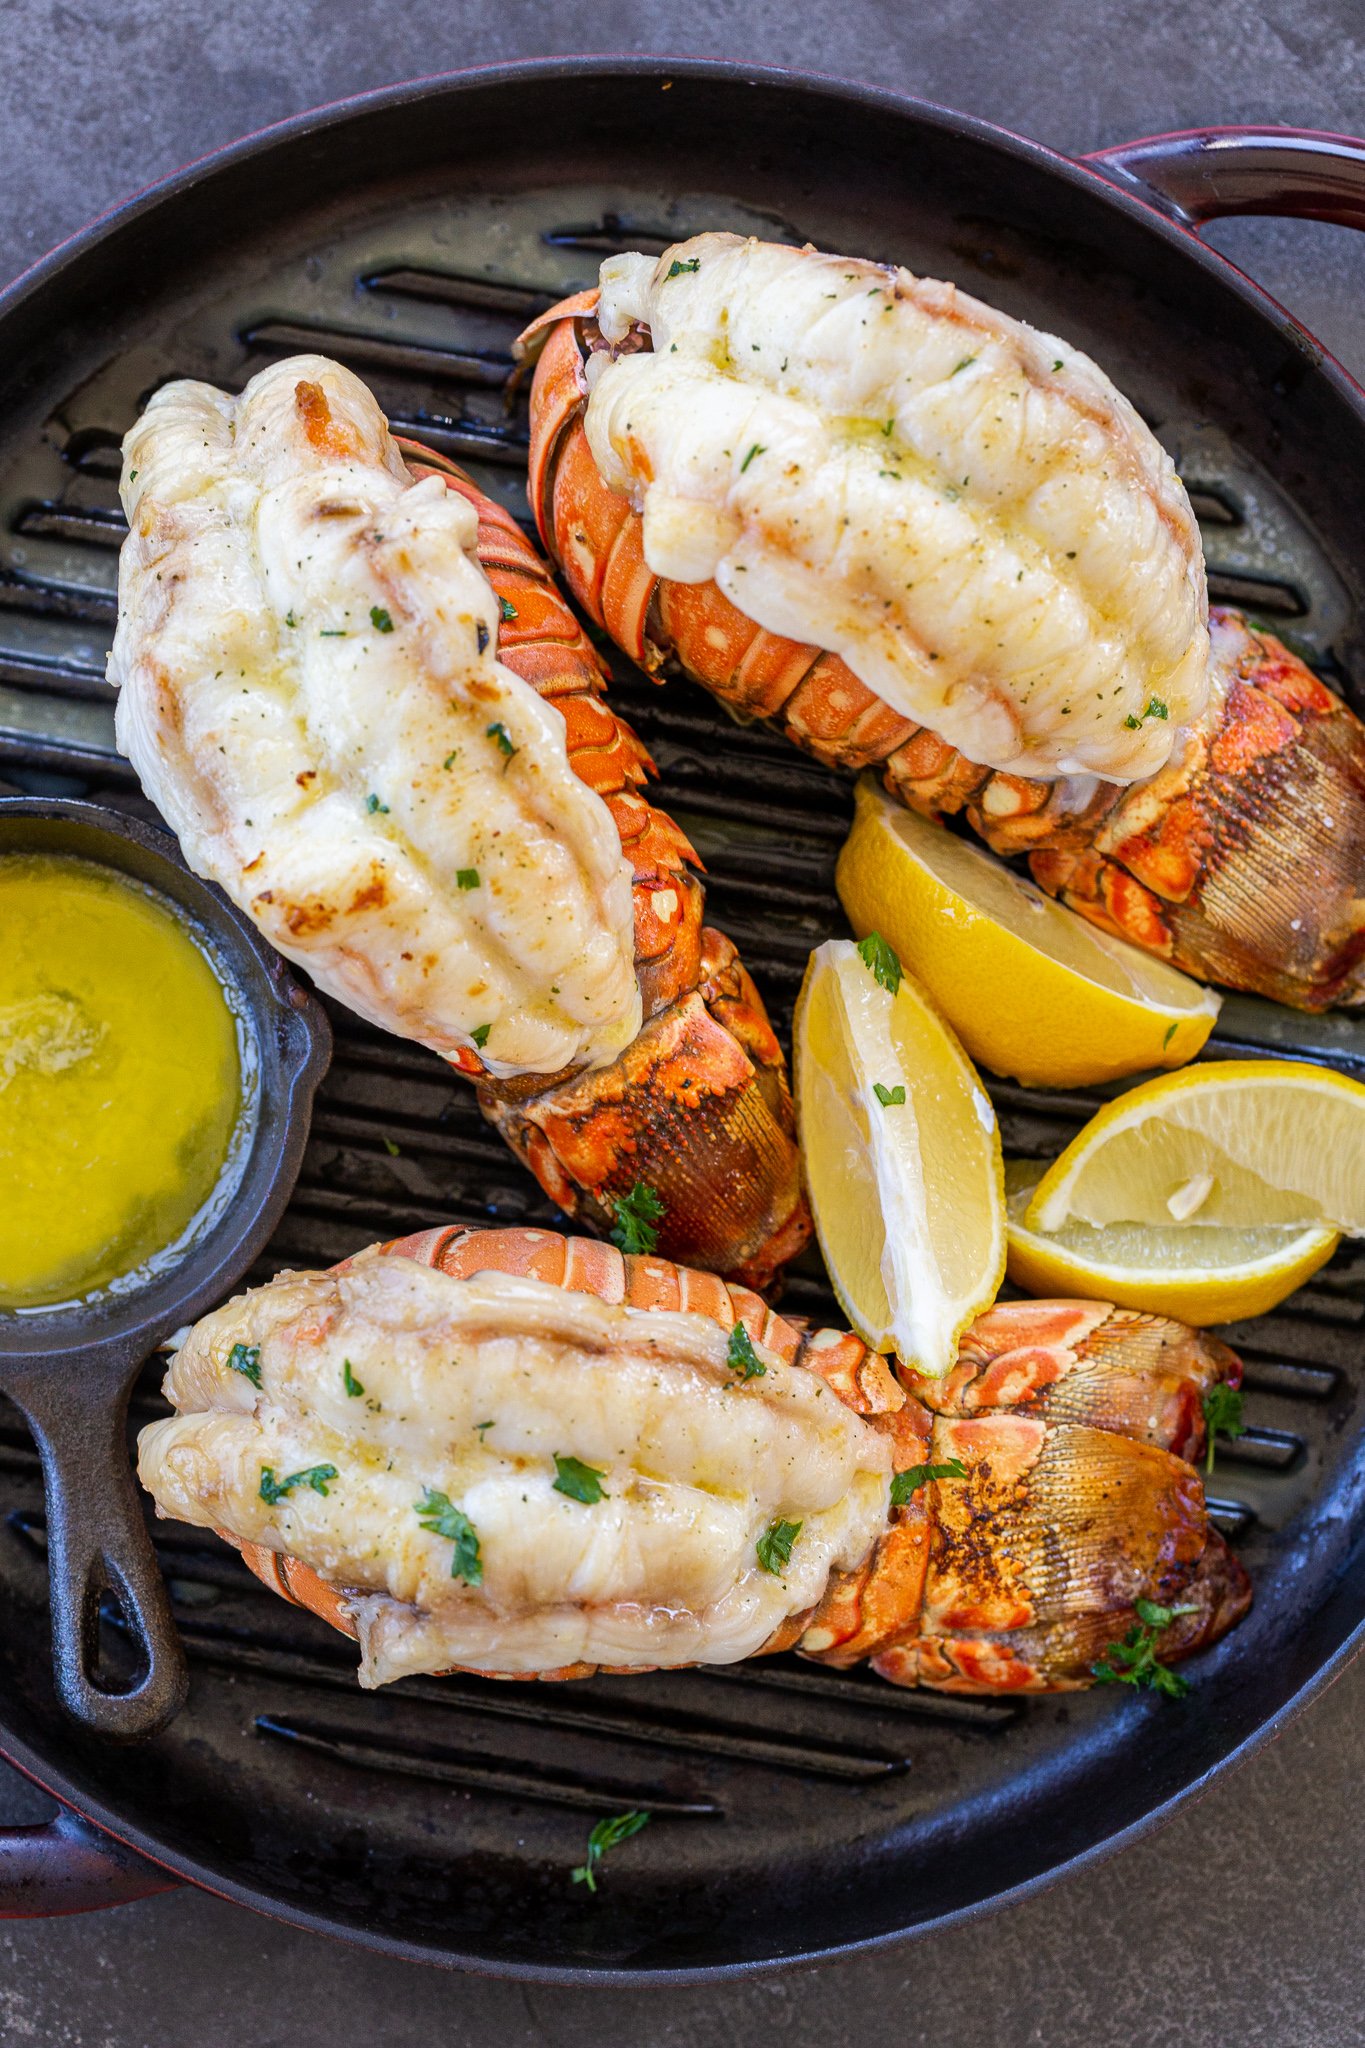 III. The Best Grilling Techniques for Lobster Tails